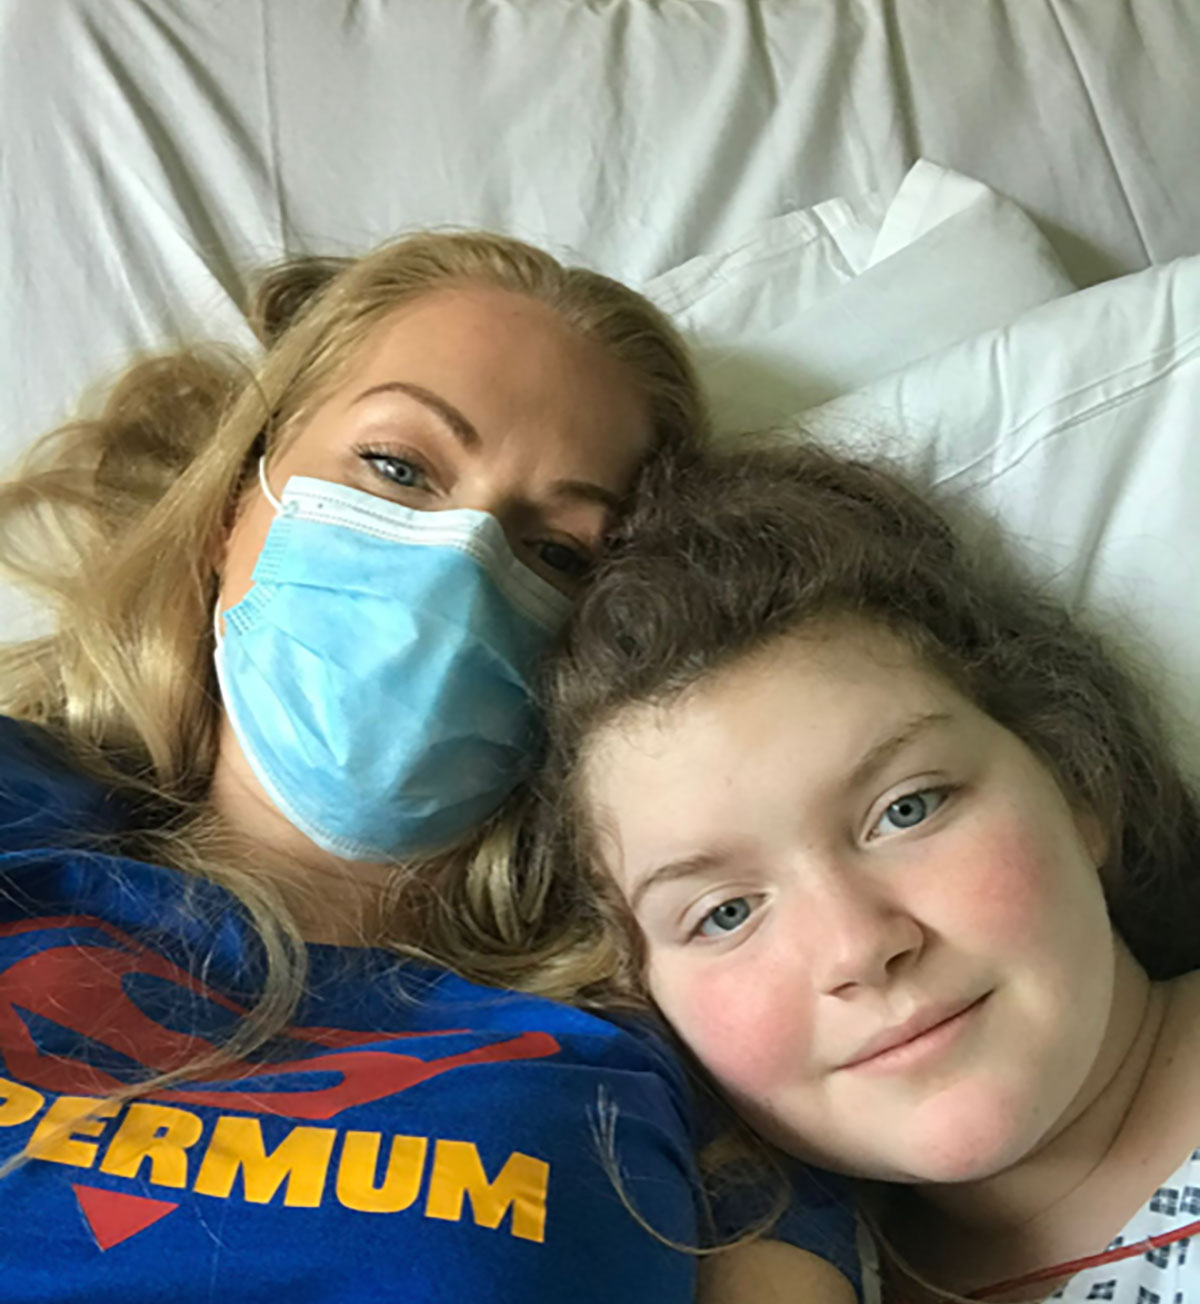 Penelope and Natasha together during a hospital stay